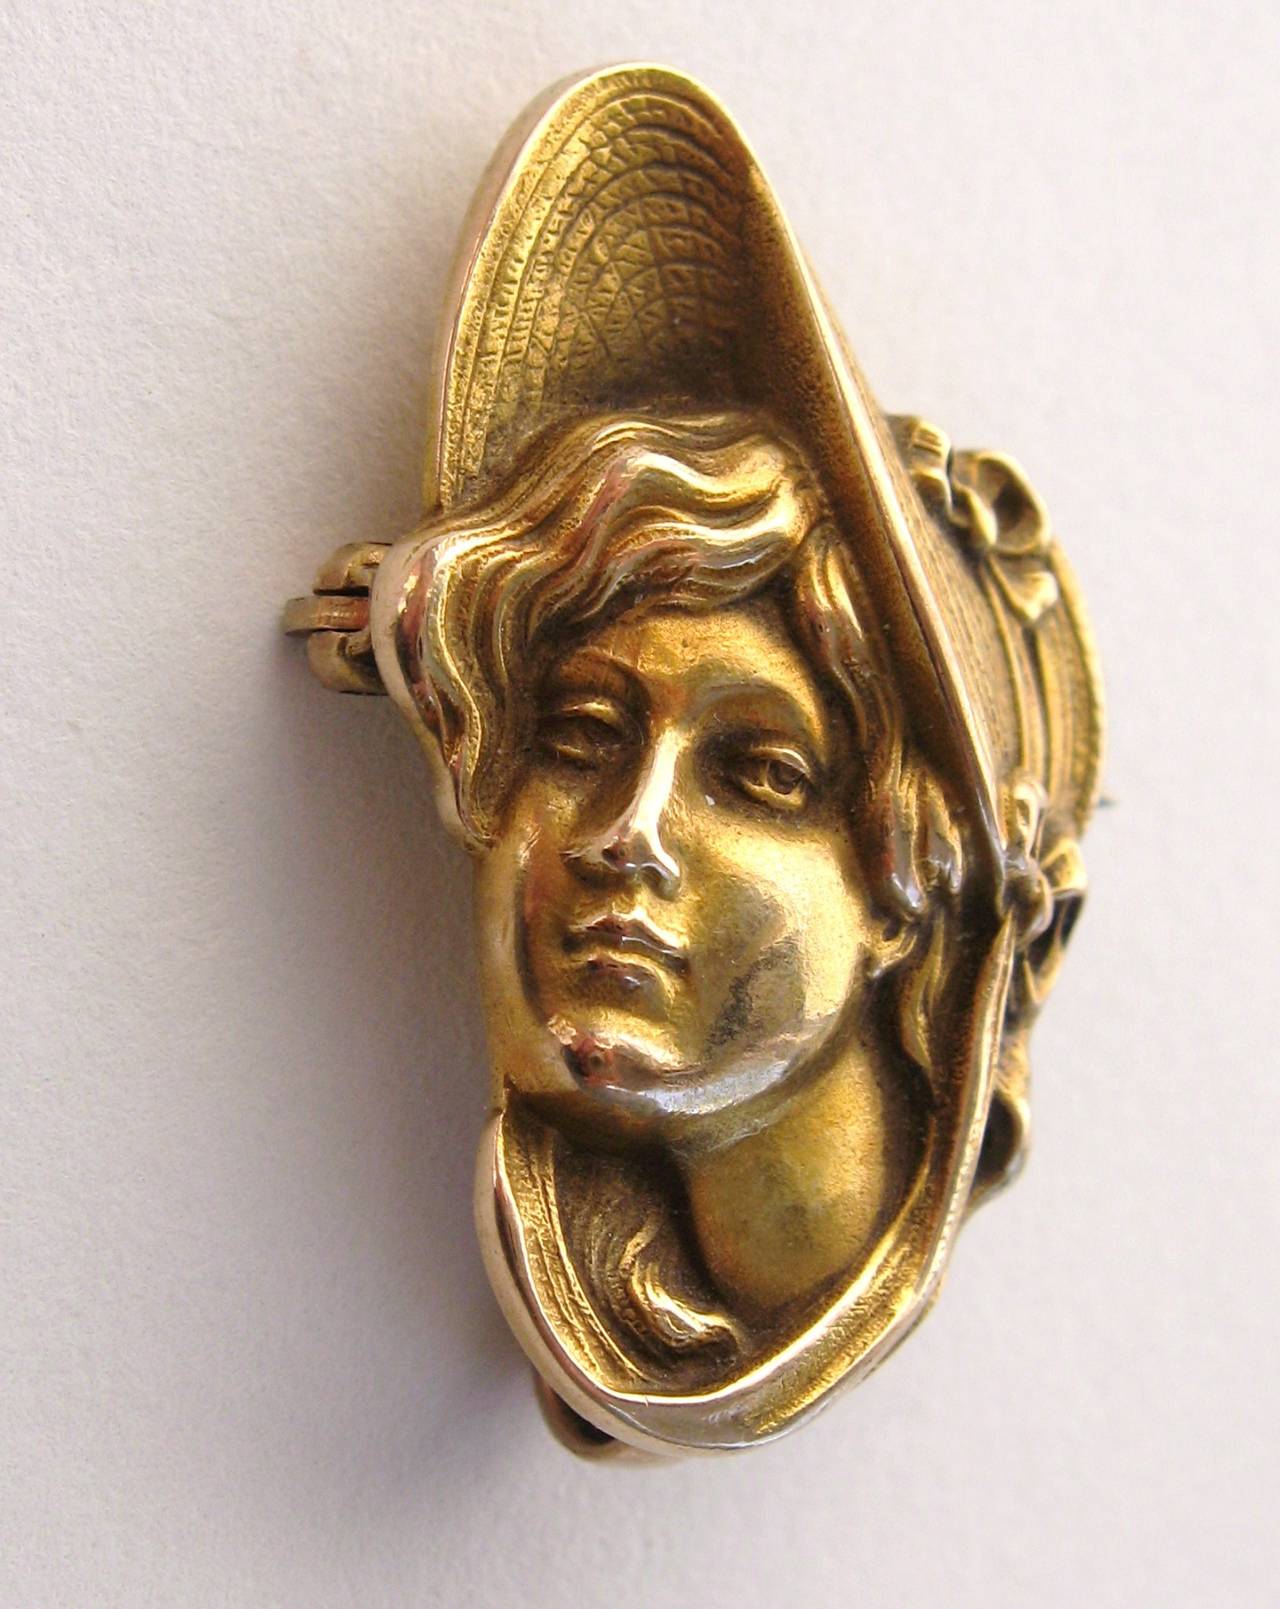 Vintage art nouveau circa 1900s Profile of a women brooch pin. Lovely lady in a bonnet. You can attach a chain to the back to wear as a pendant. Crafted in 10  karat yellow gold. Measures  1.22